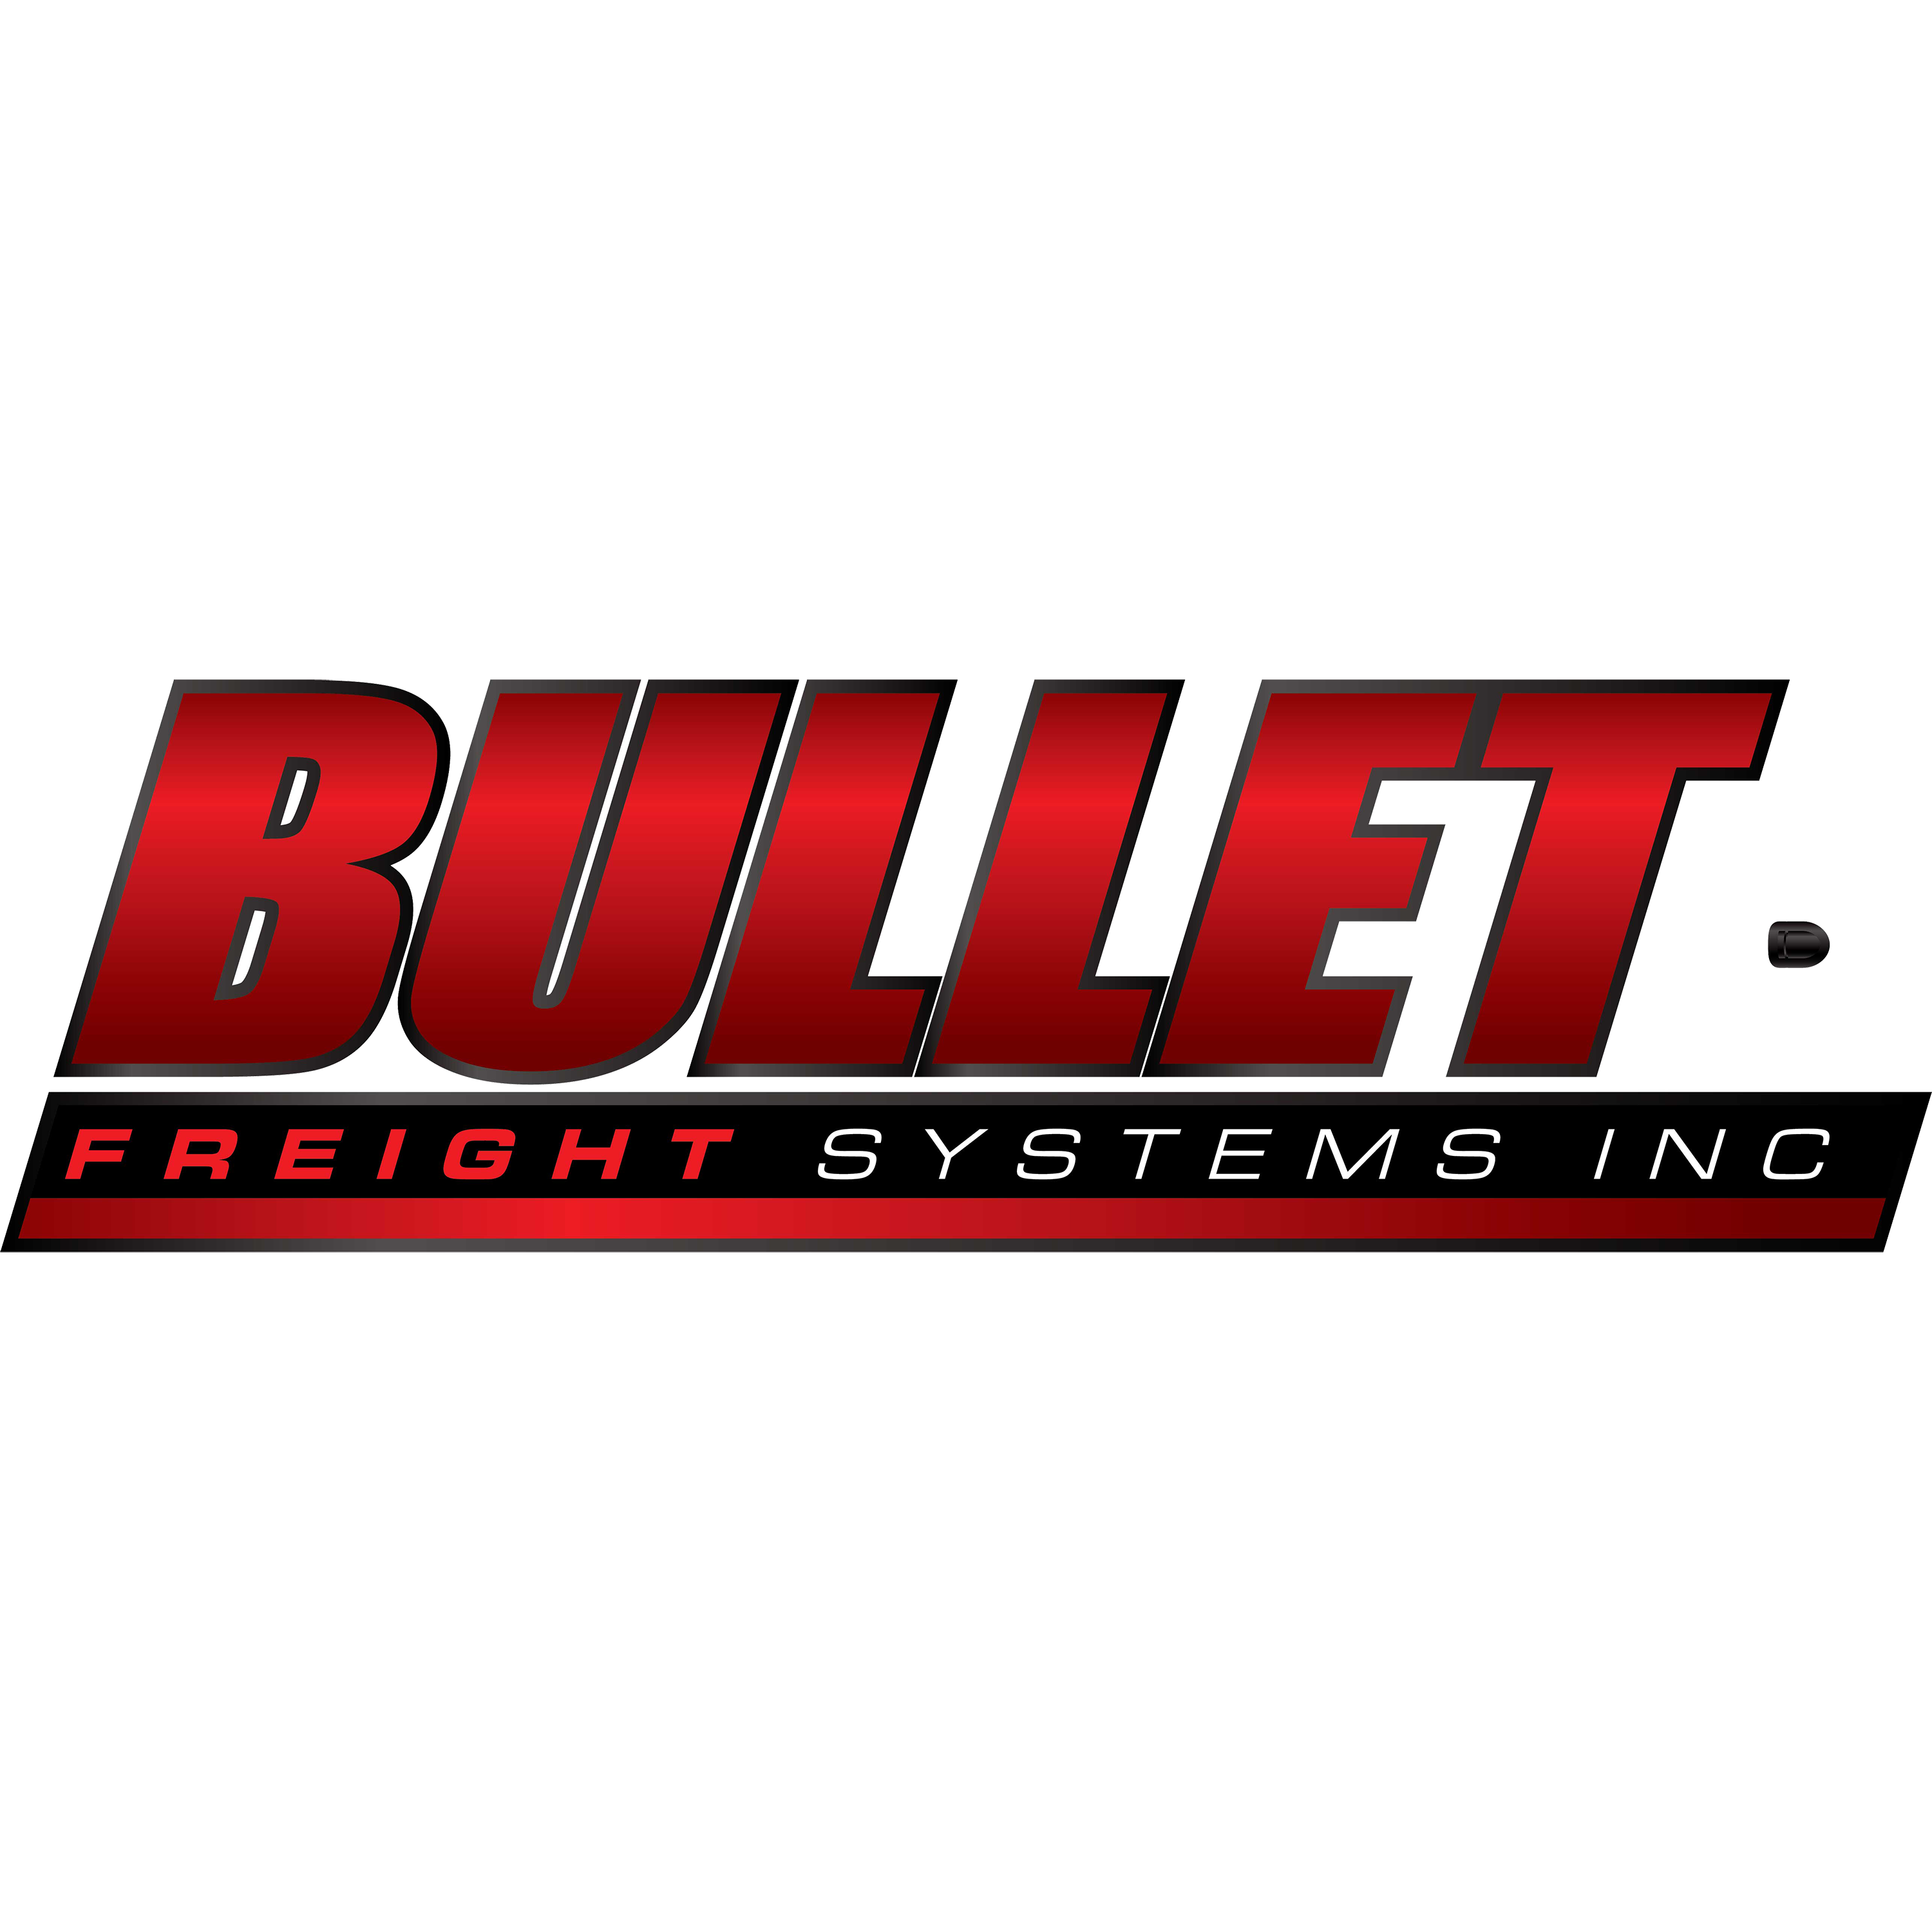 Doral Chamber of Commerce introduces Bullet Freight Systems Inc as a traveling service member.